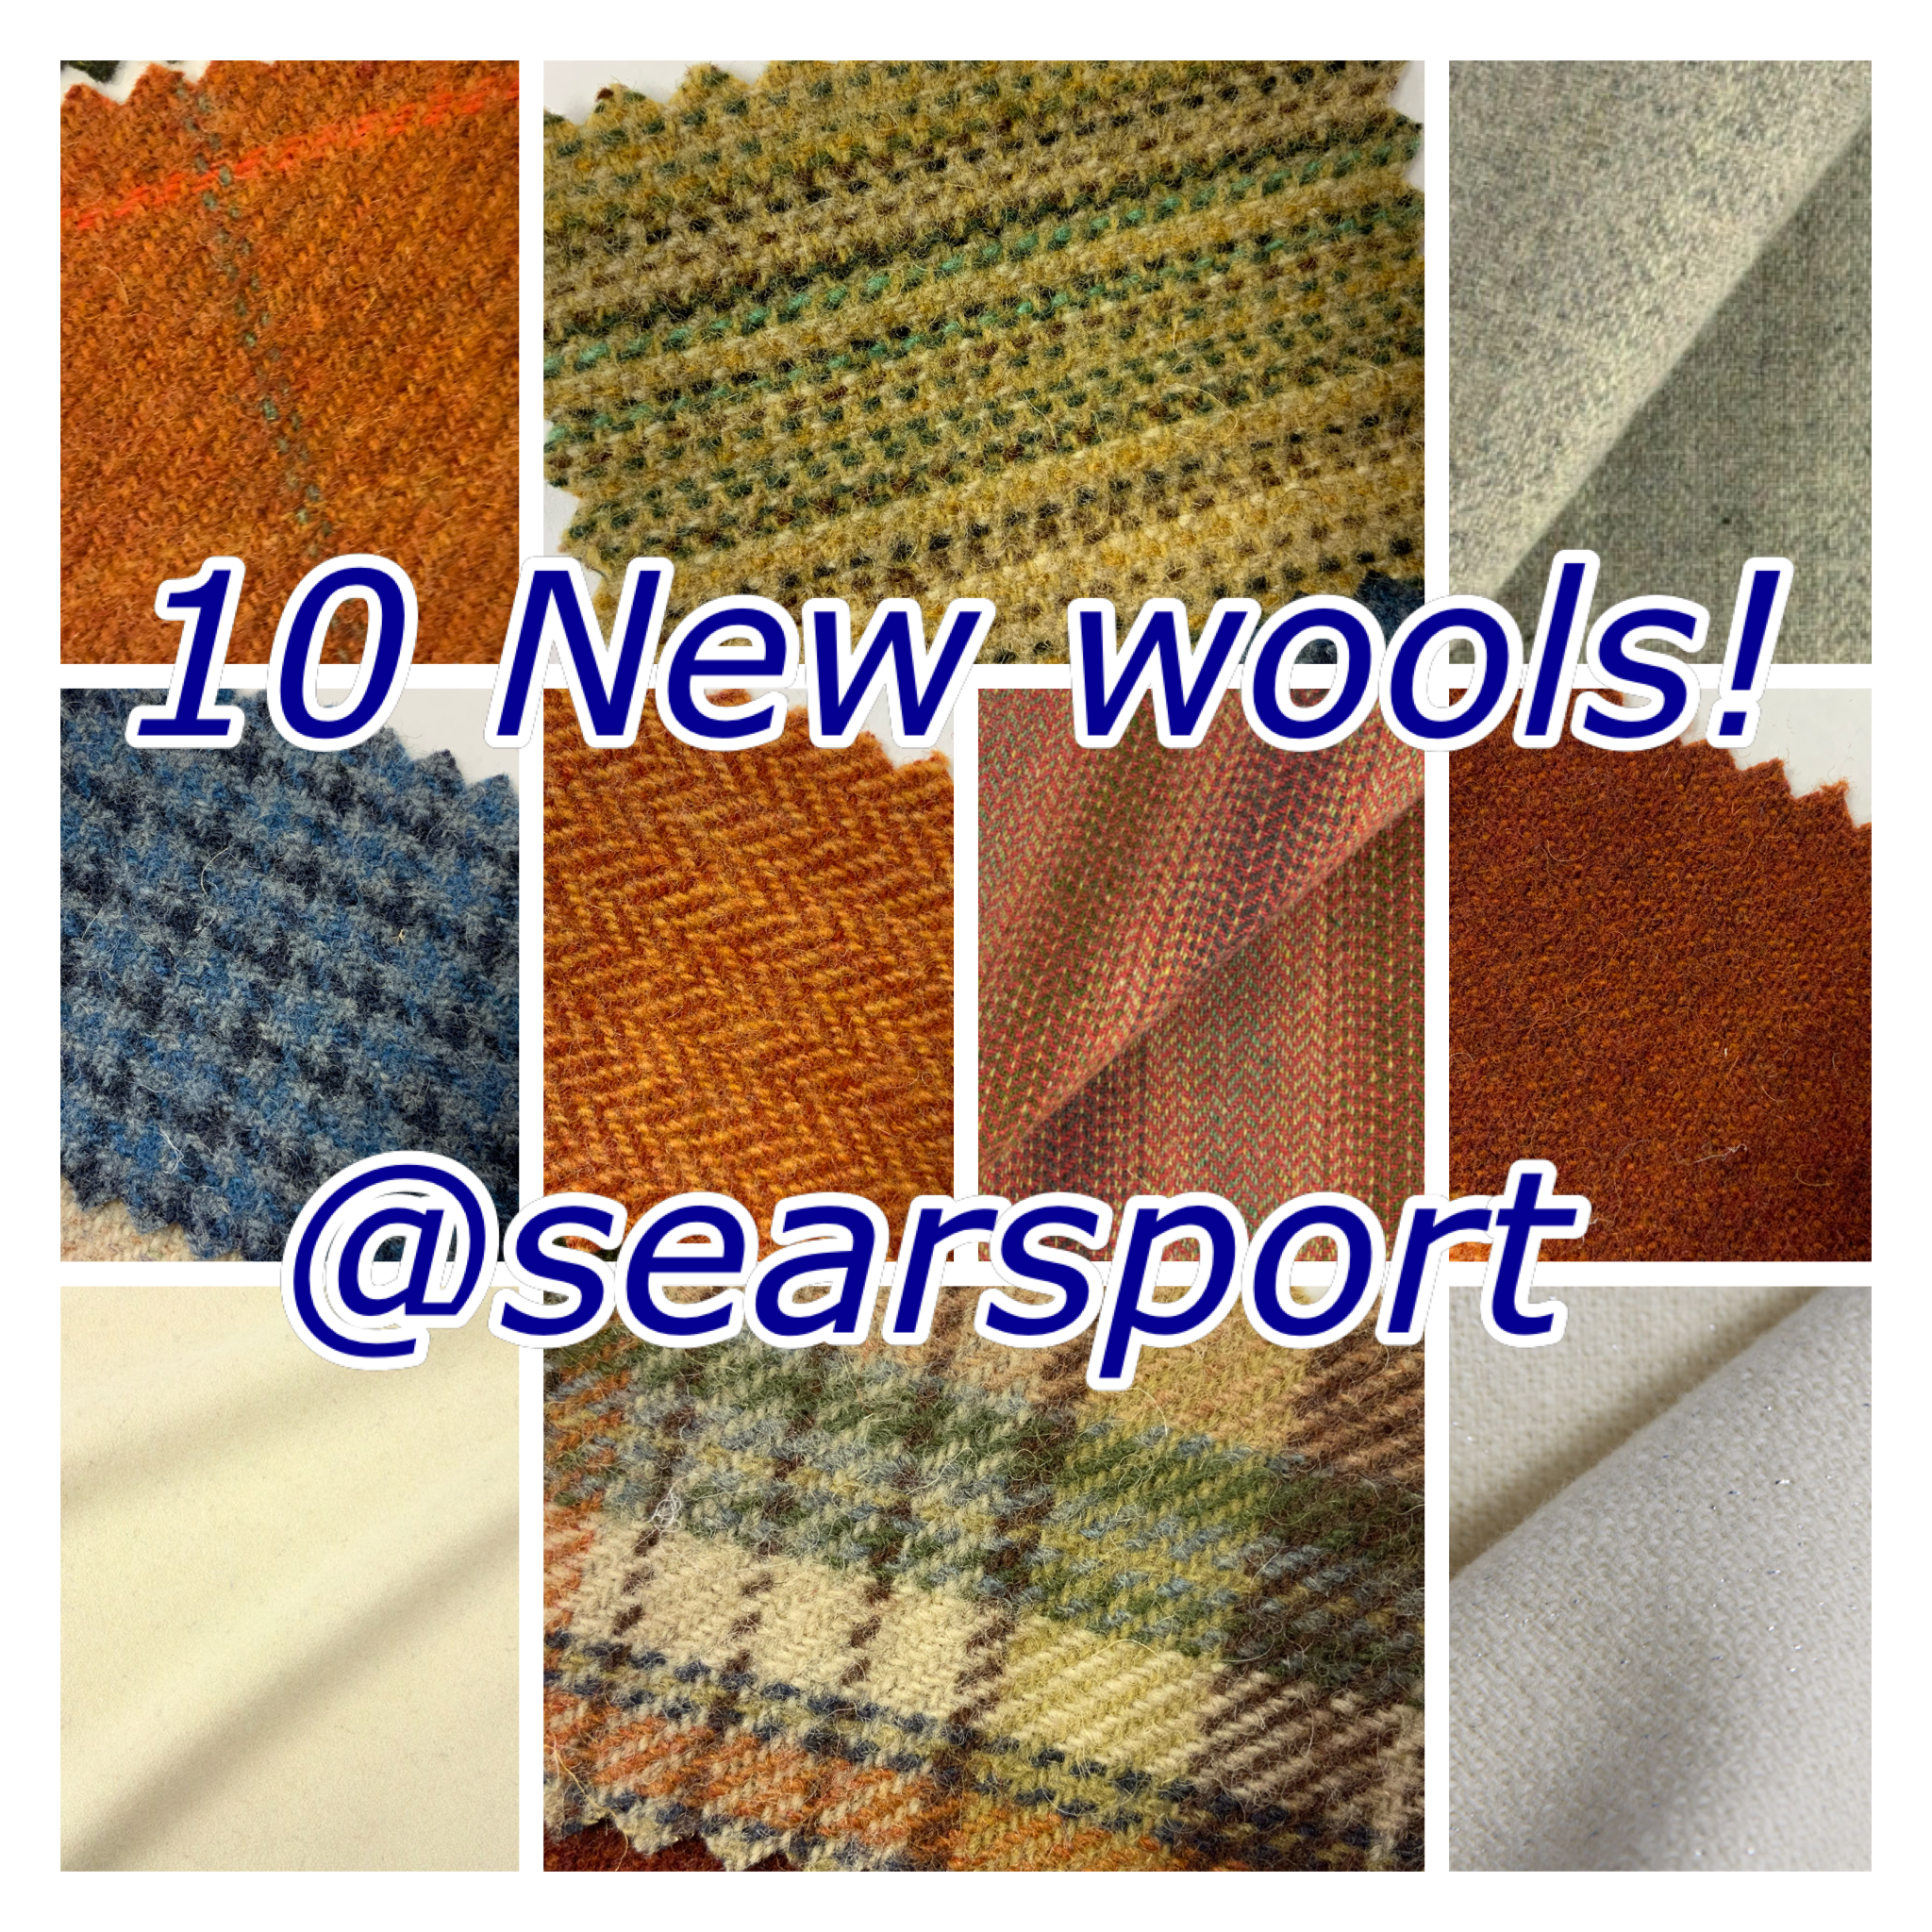 Wool delivery 9/24 more new wools!